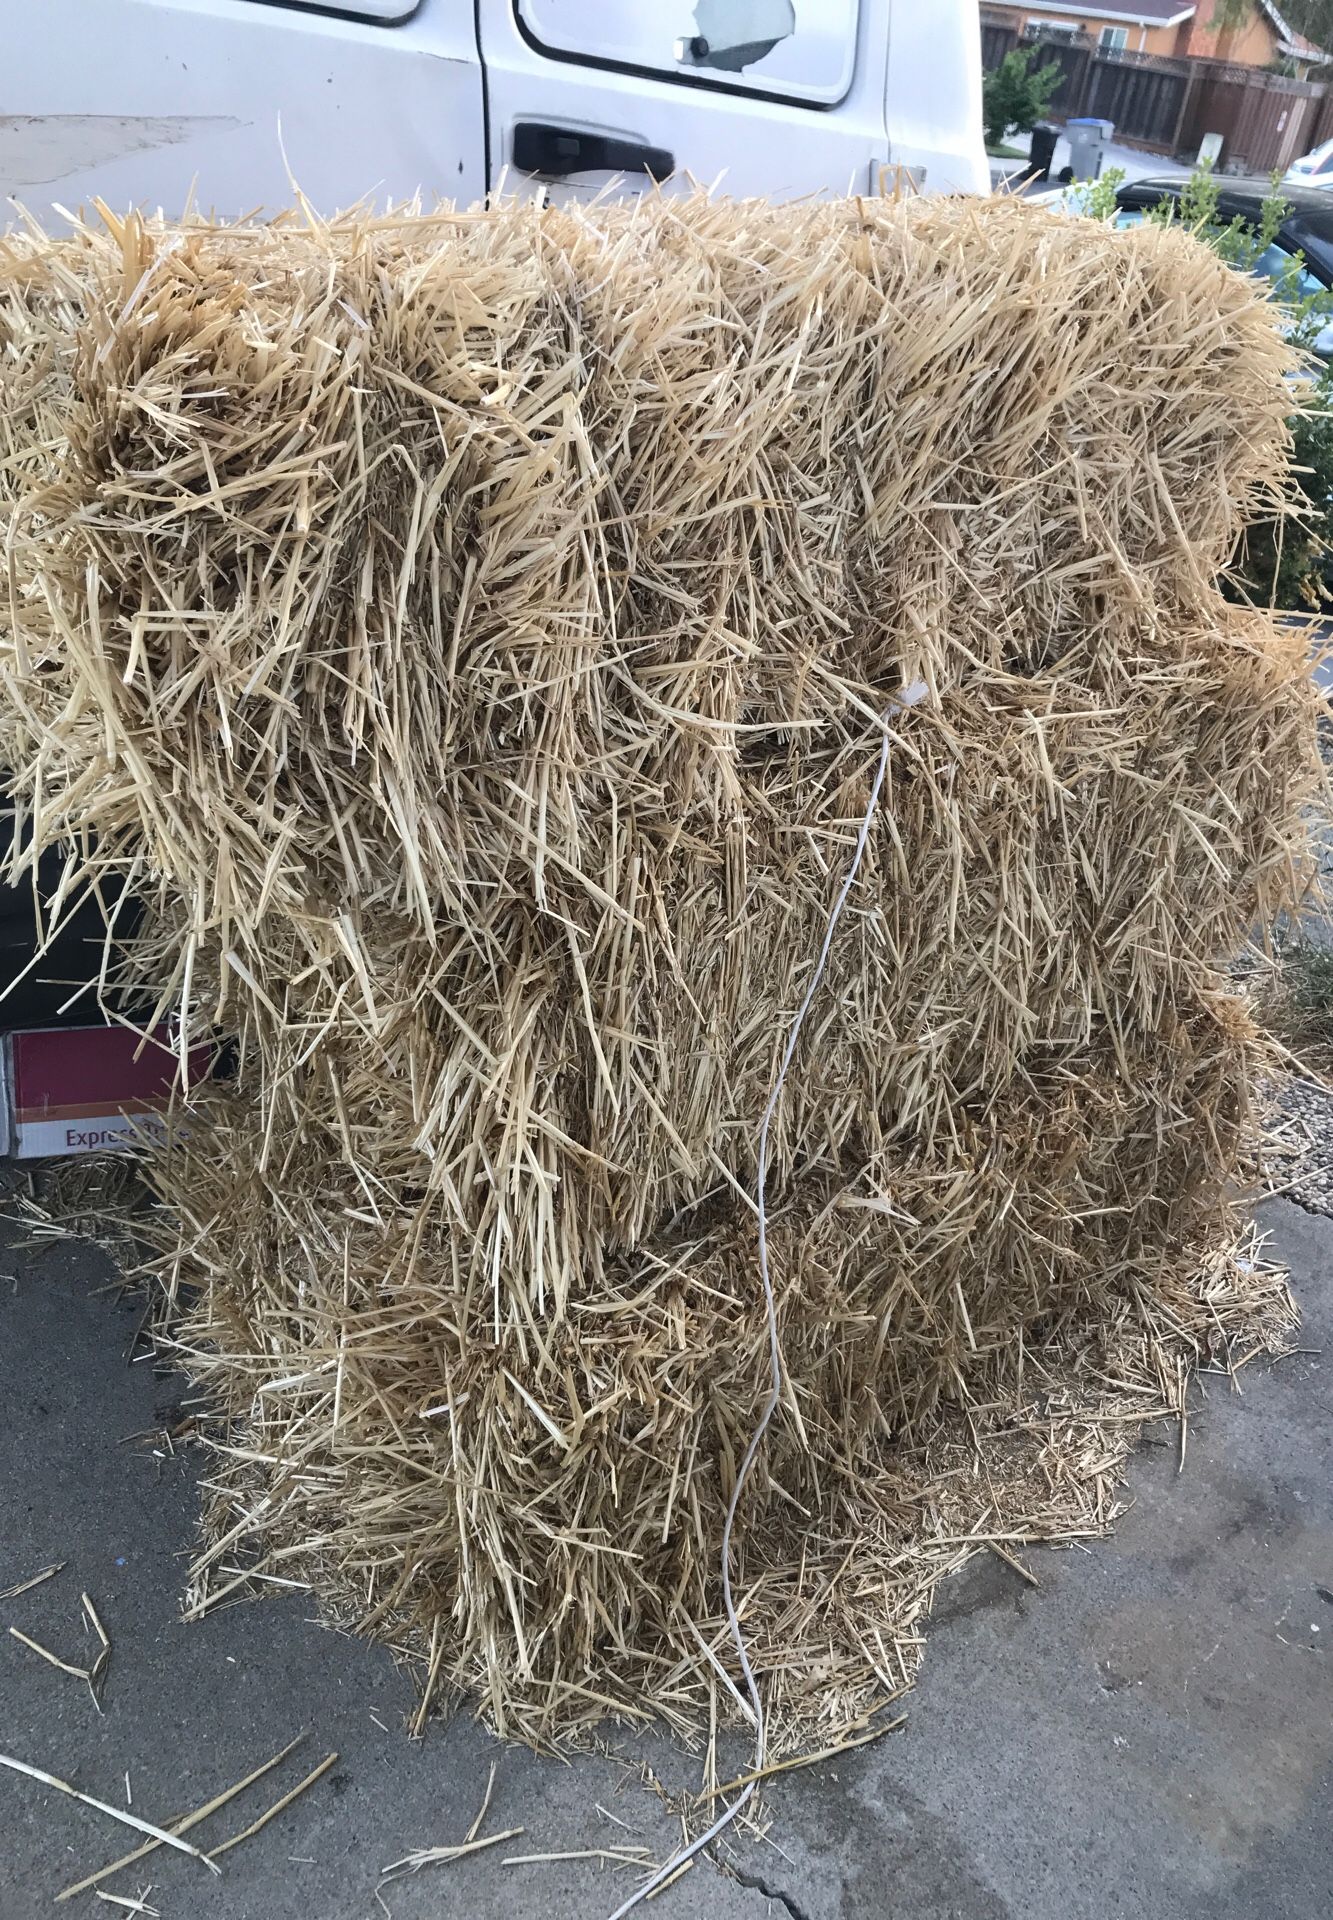 Hay for cow or horse